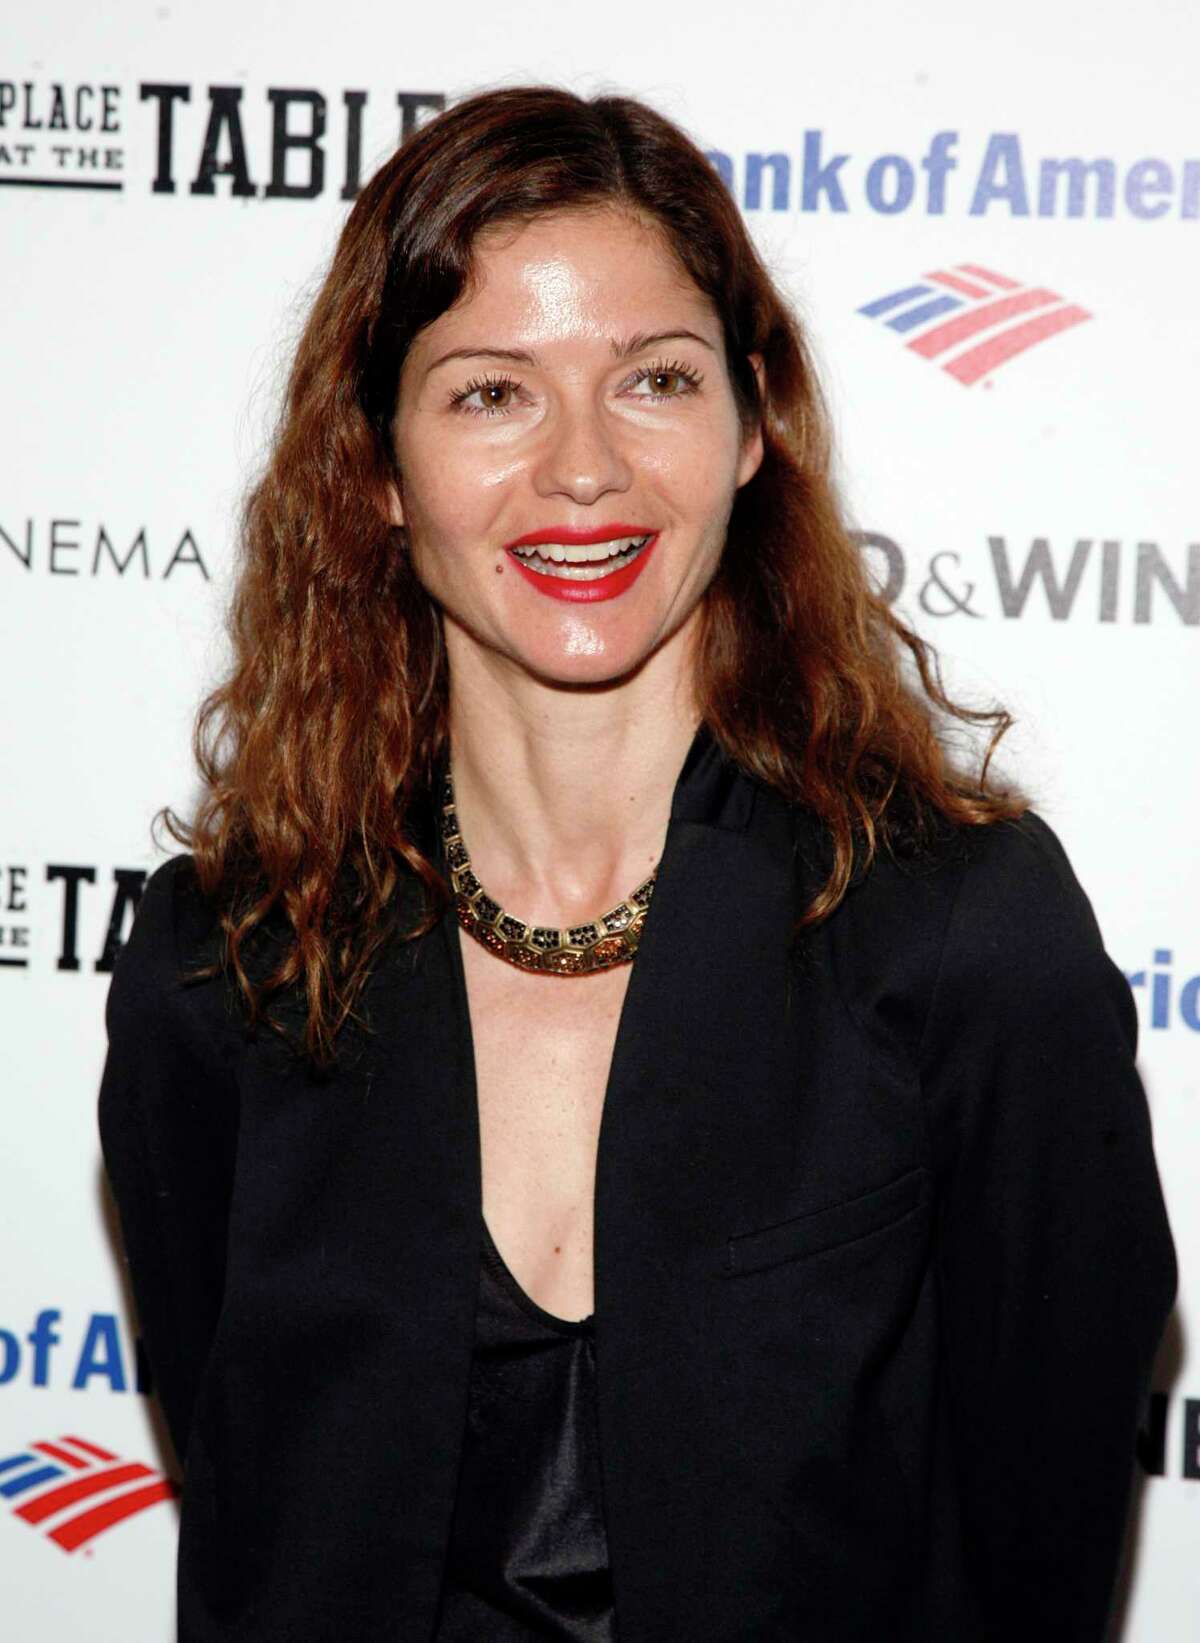 Actress Jill Hennessy attends a screening of "A Place at the Table" presented by Bank of America and The Cinema Society on Wednesday Feb. 27, 2013, at the Museum of Modern Art in New York. (Photo by Andy Kropa/Invision/AP)